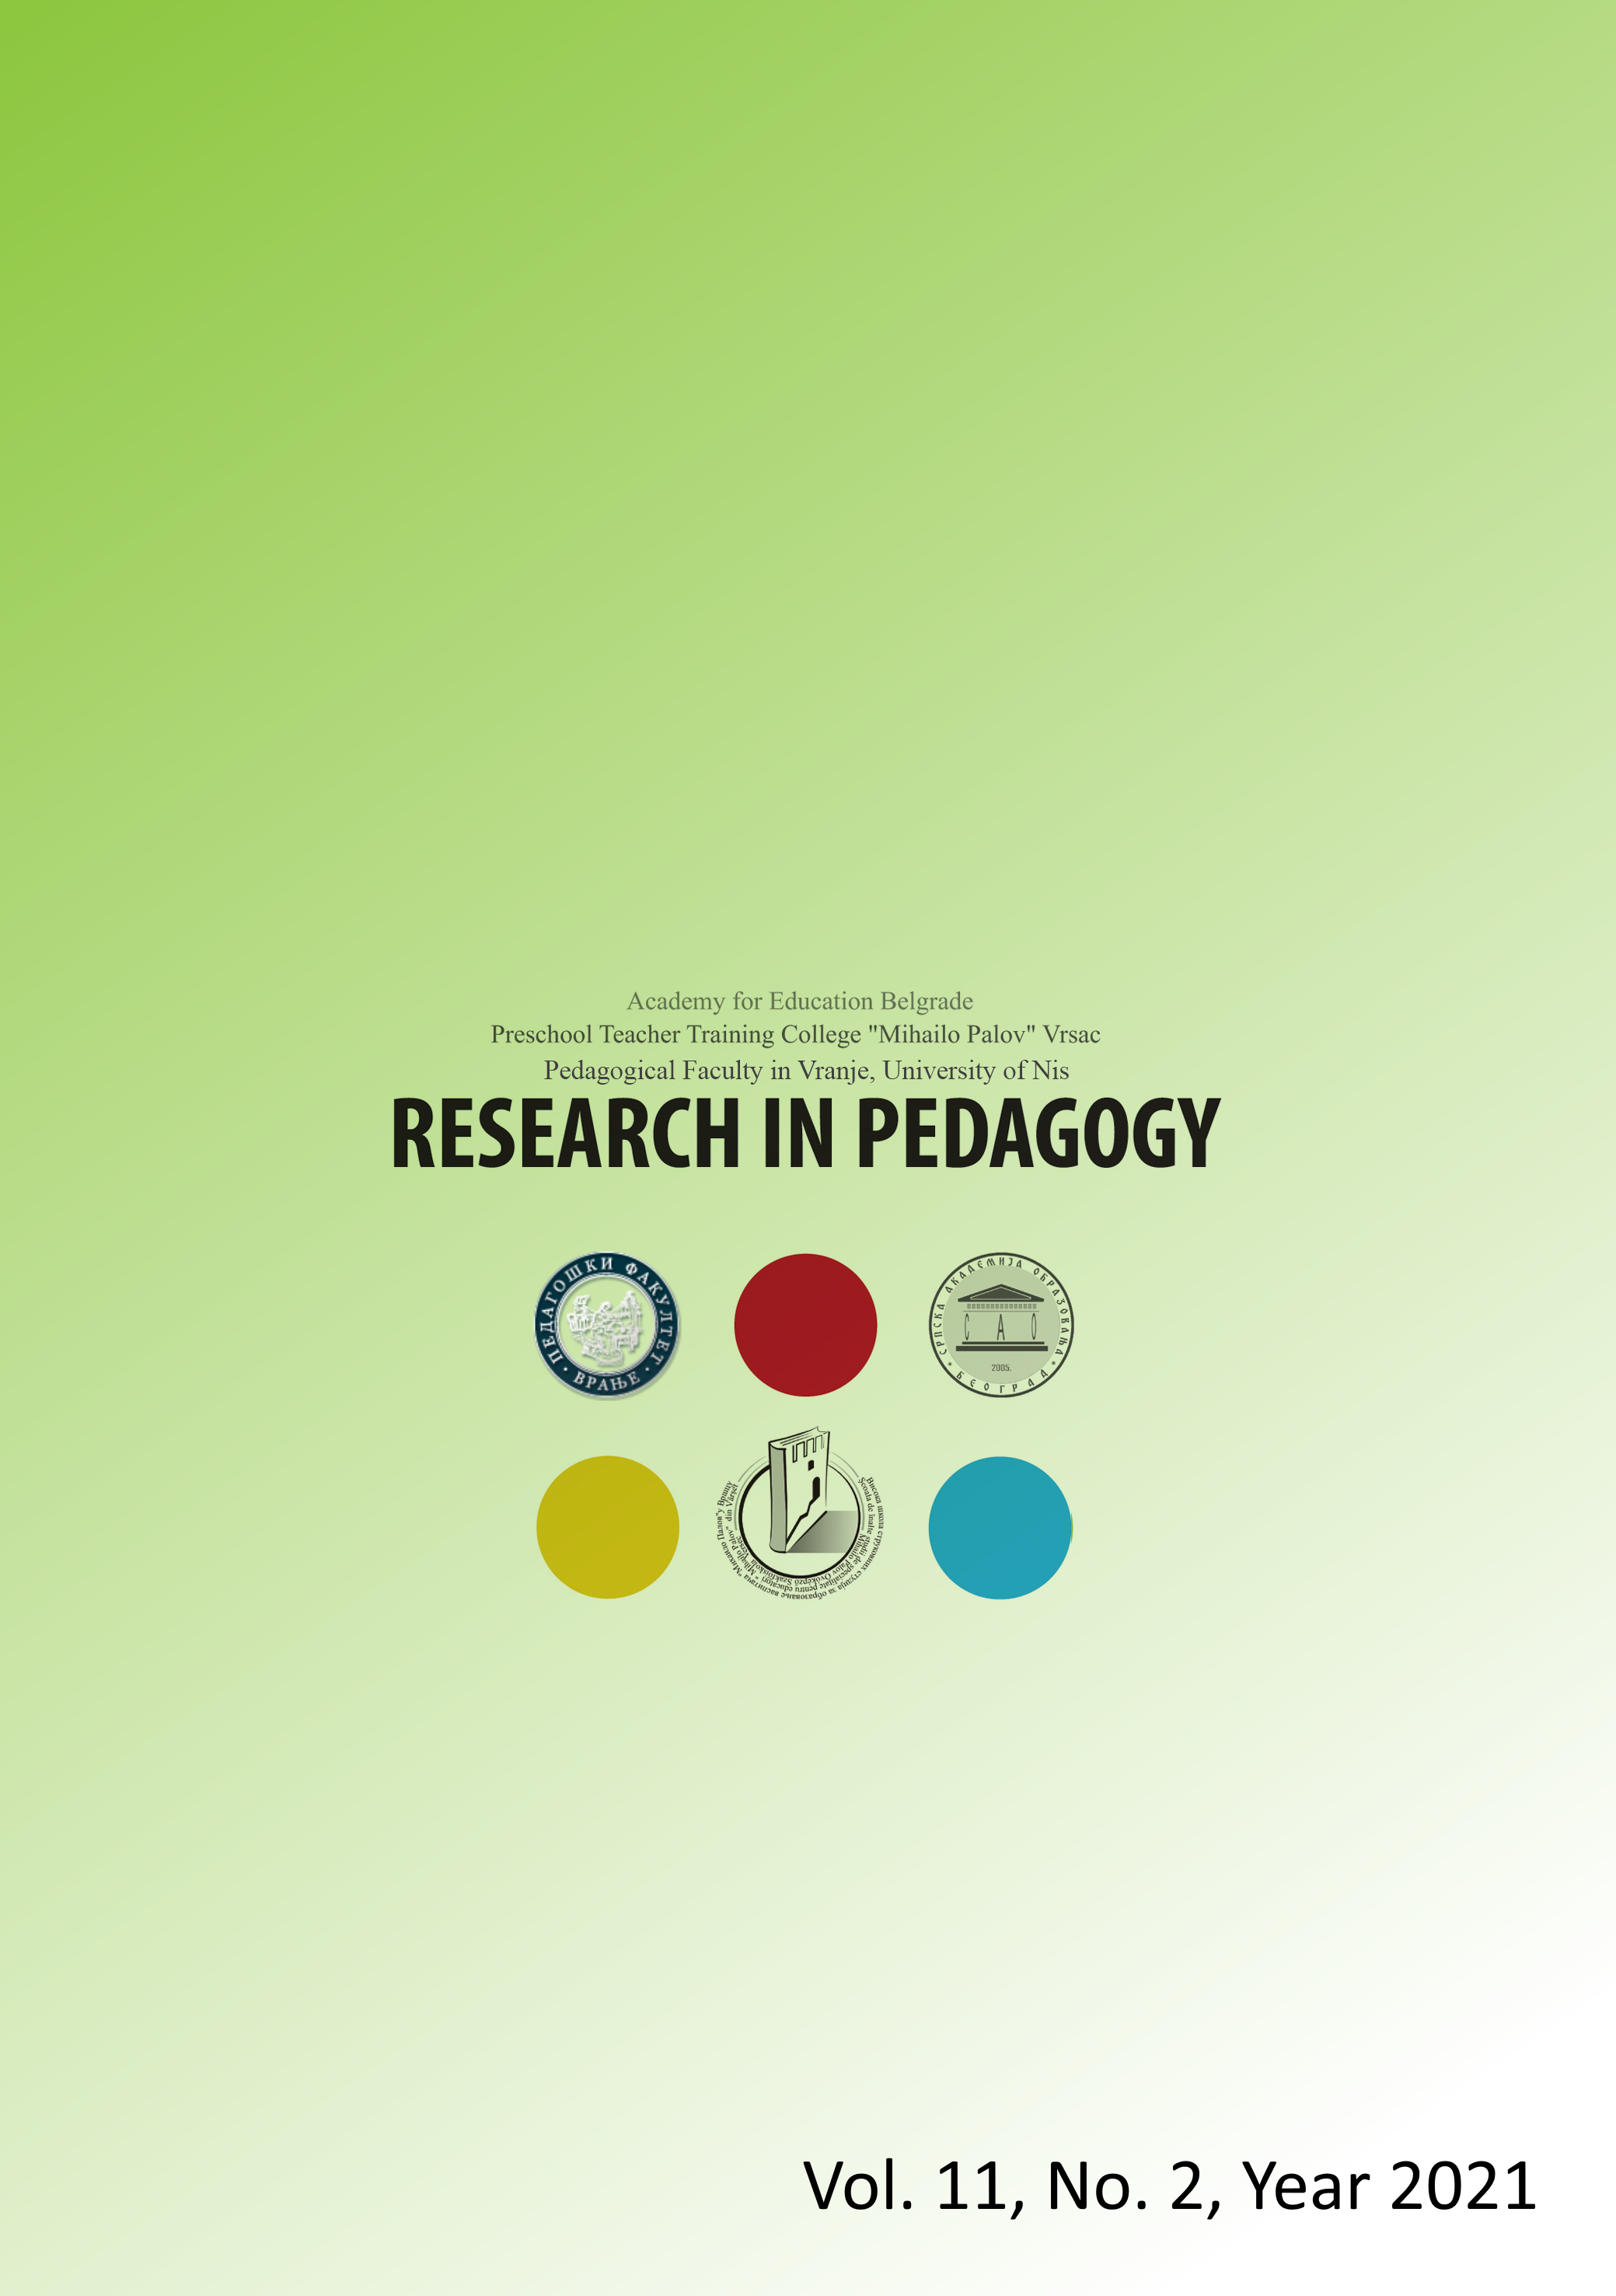 THE RELATIONSHIP BETWEEN PRESCHOOL TEACHERSPEDAGOGICAL CONTENT KNOWLEDGE IN MATHEMATICS, CHILDRENS’ MATH ABILITY AND LIKING Cover Image